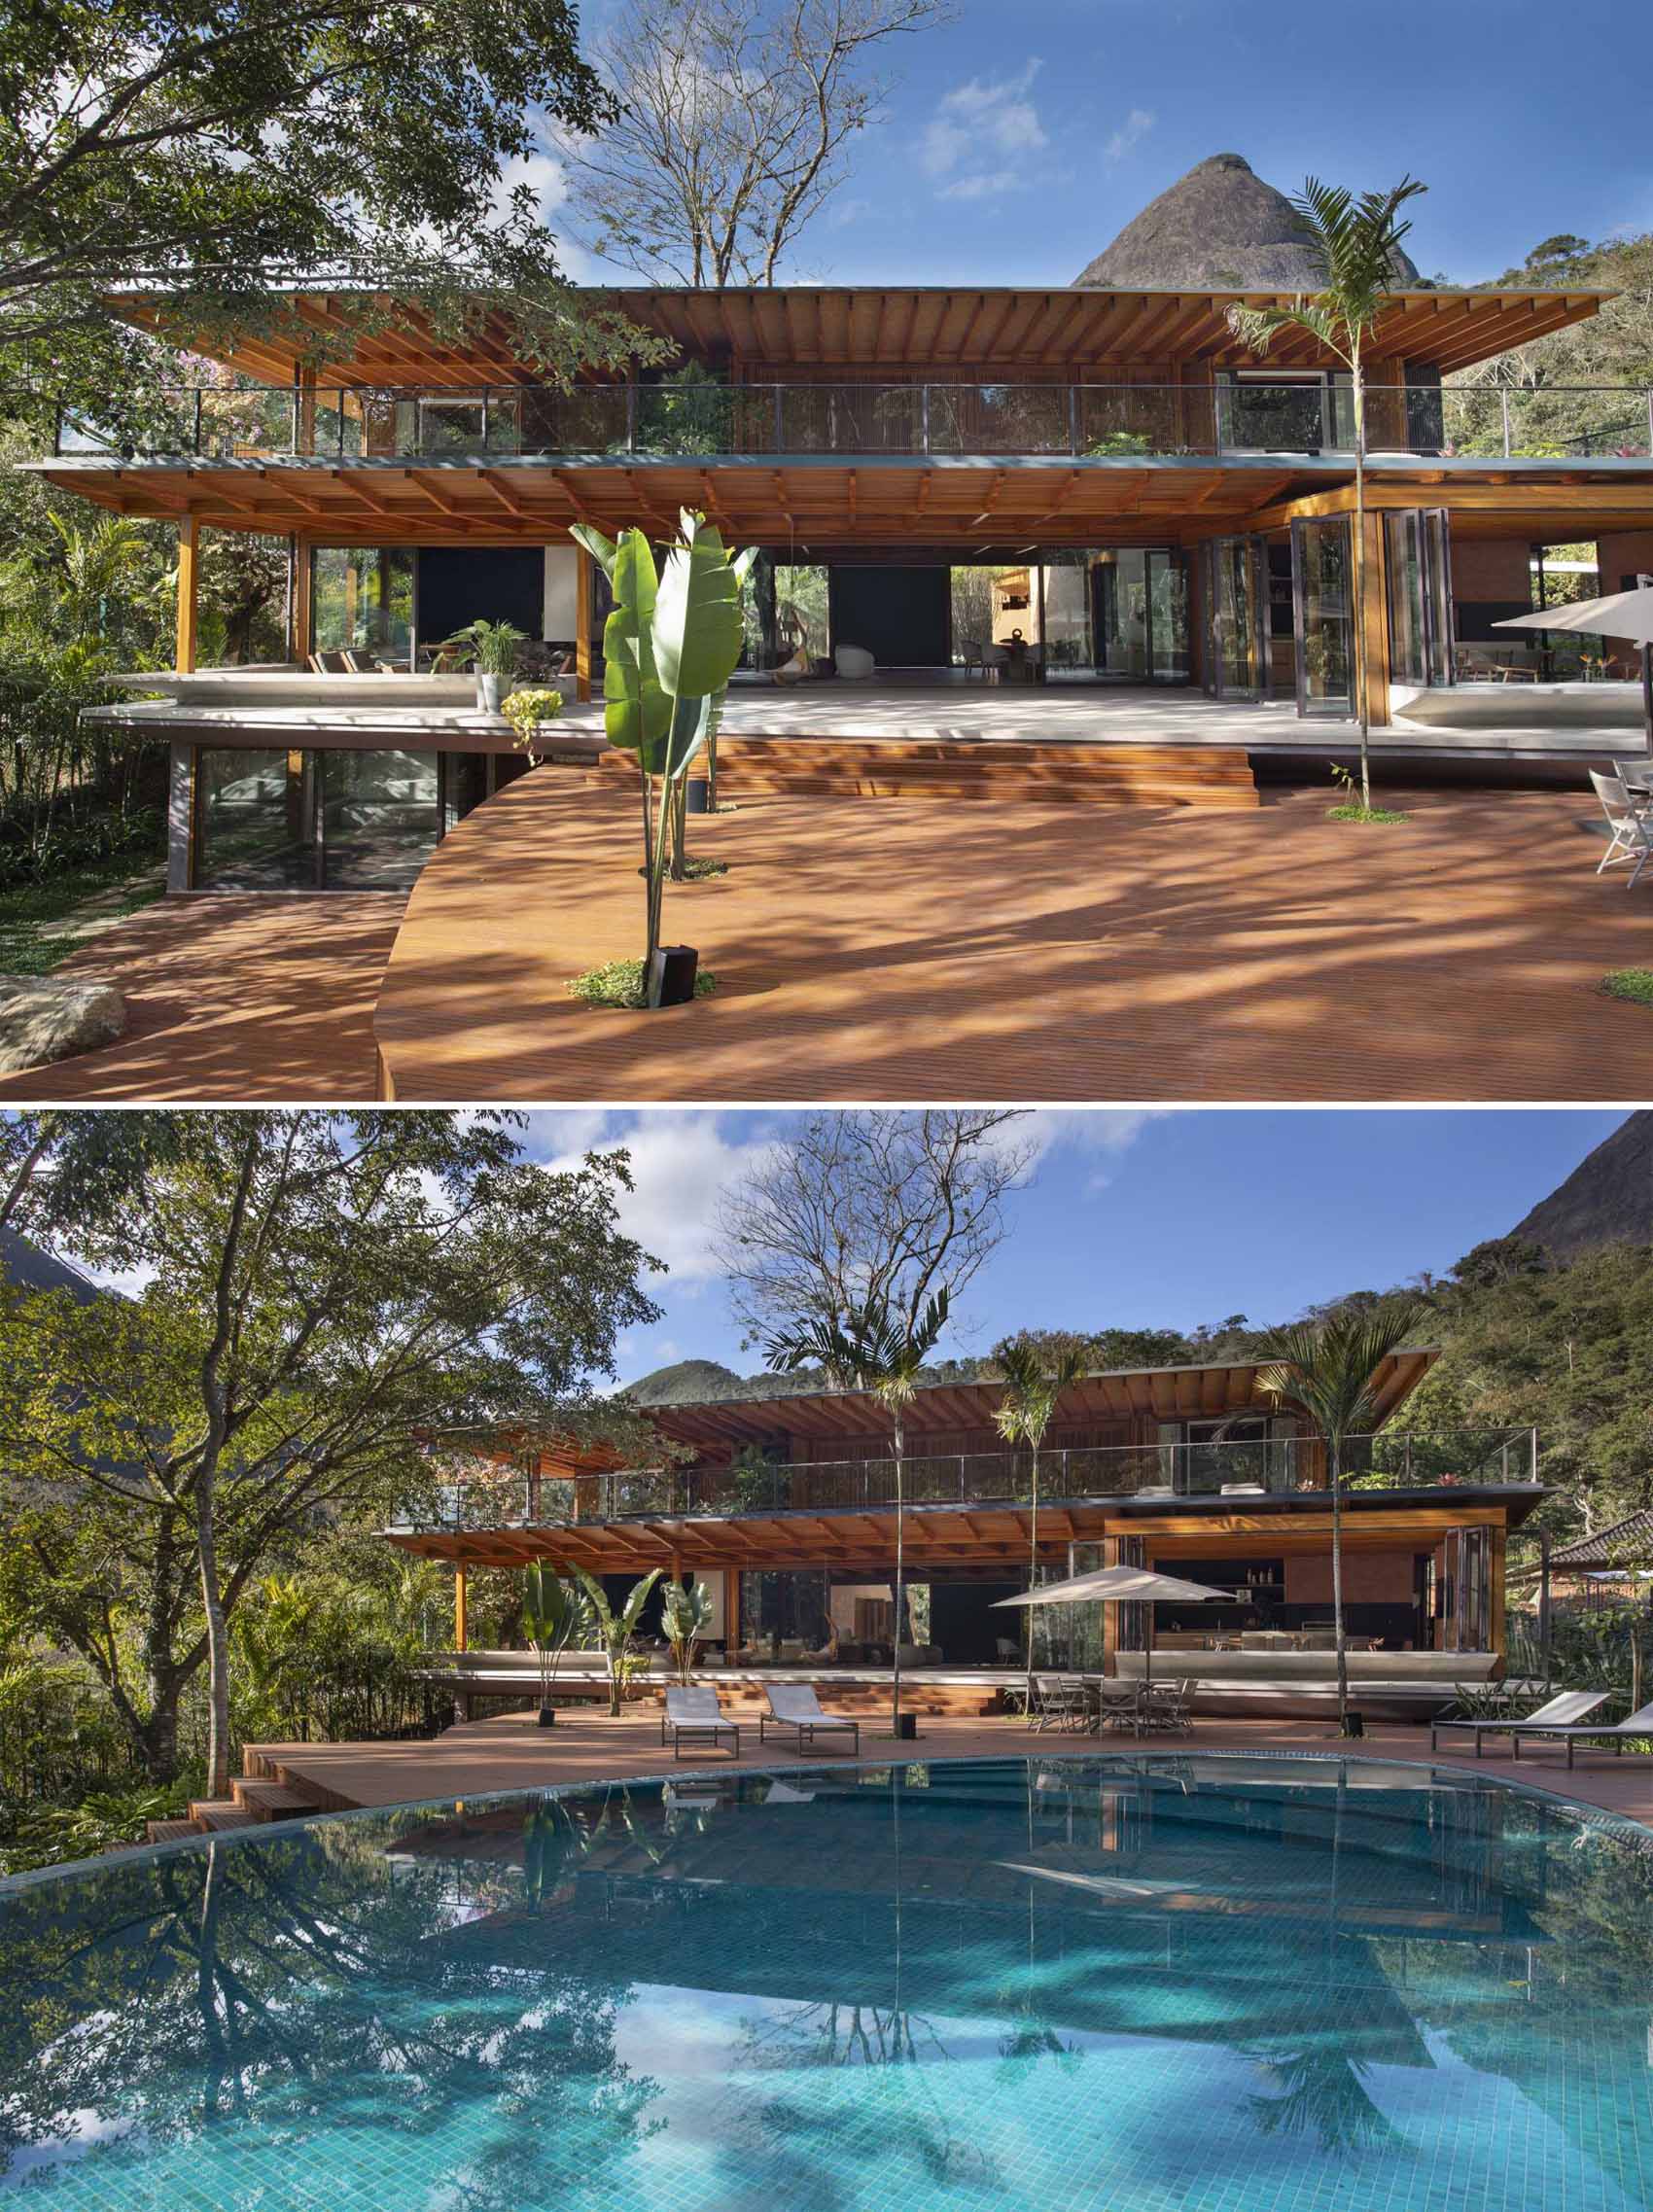 This modern house has steps that lead down from the patio to the wood deck, which has openings for plants to grow through. The deck wraps around the swimming pool, both of which have tree views.